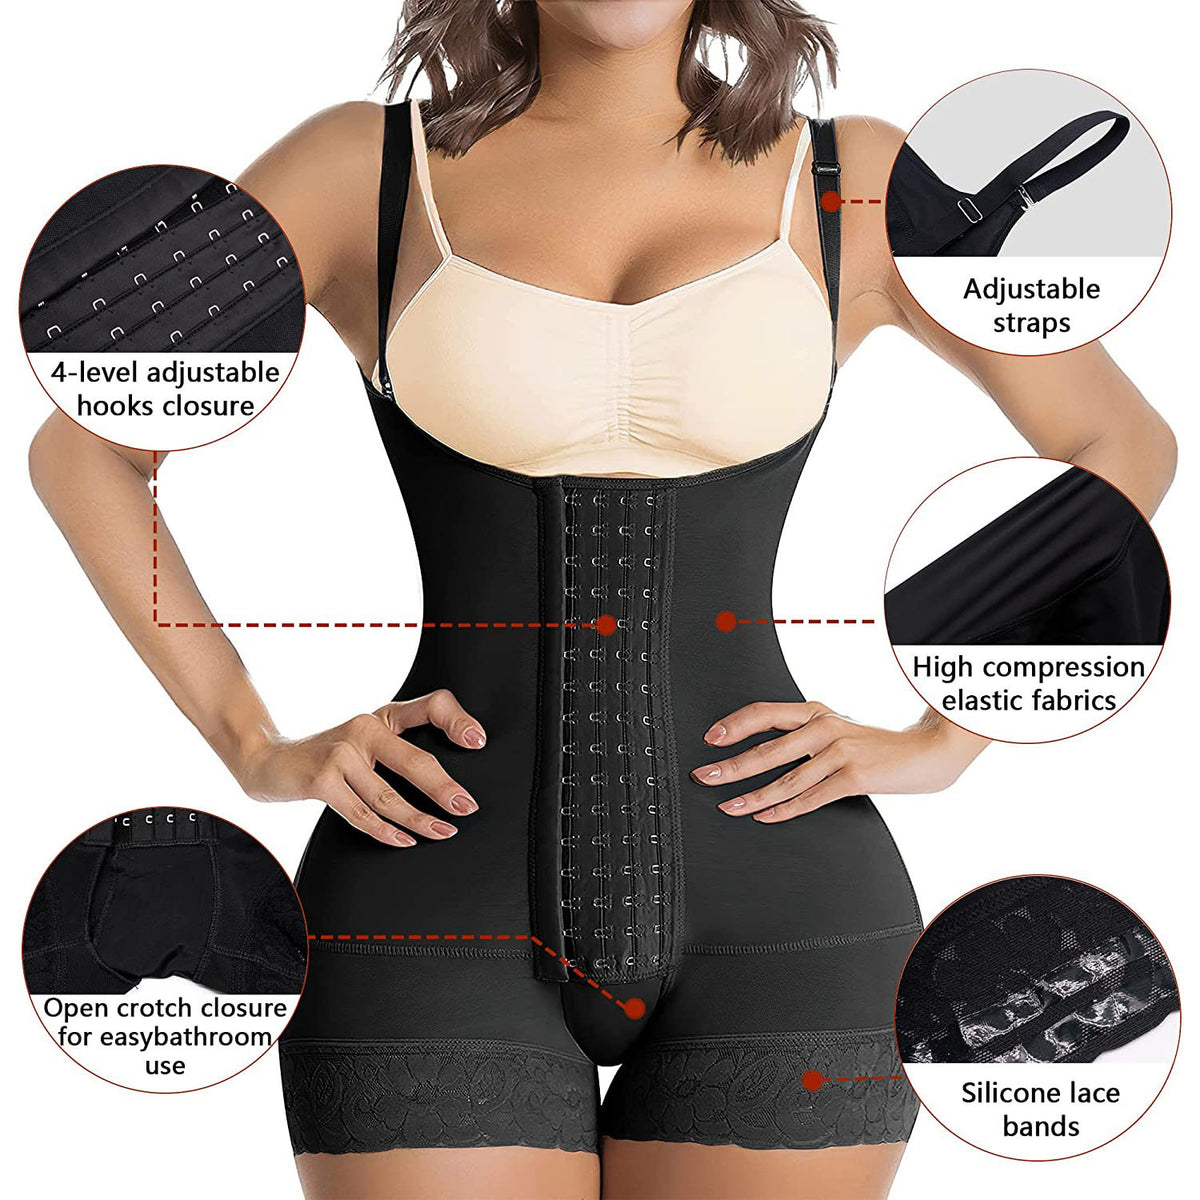 Breasted Belly Bound Body Shaper Pants Angelwarriorfitness.com